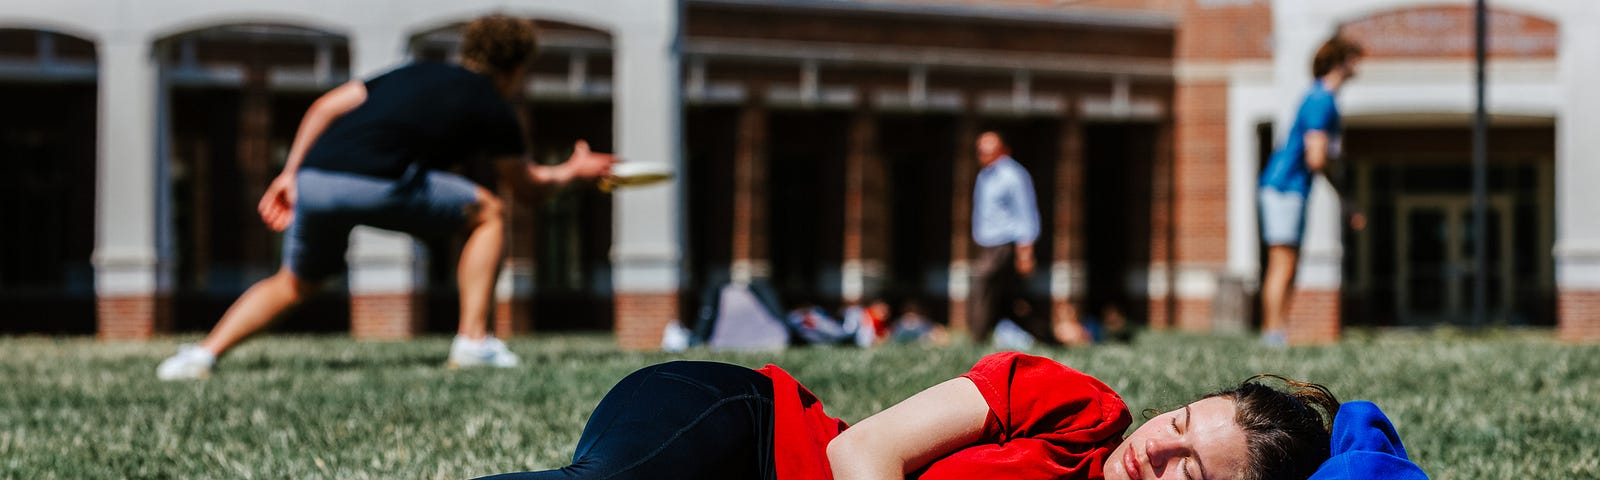 A student relaxes in the sun on the greenspace